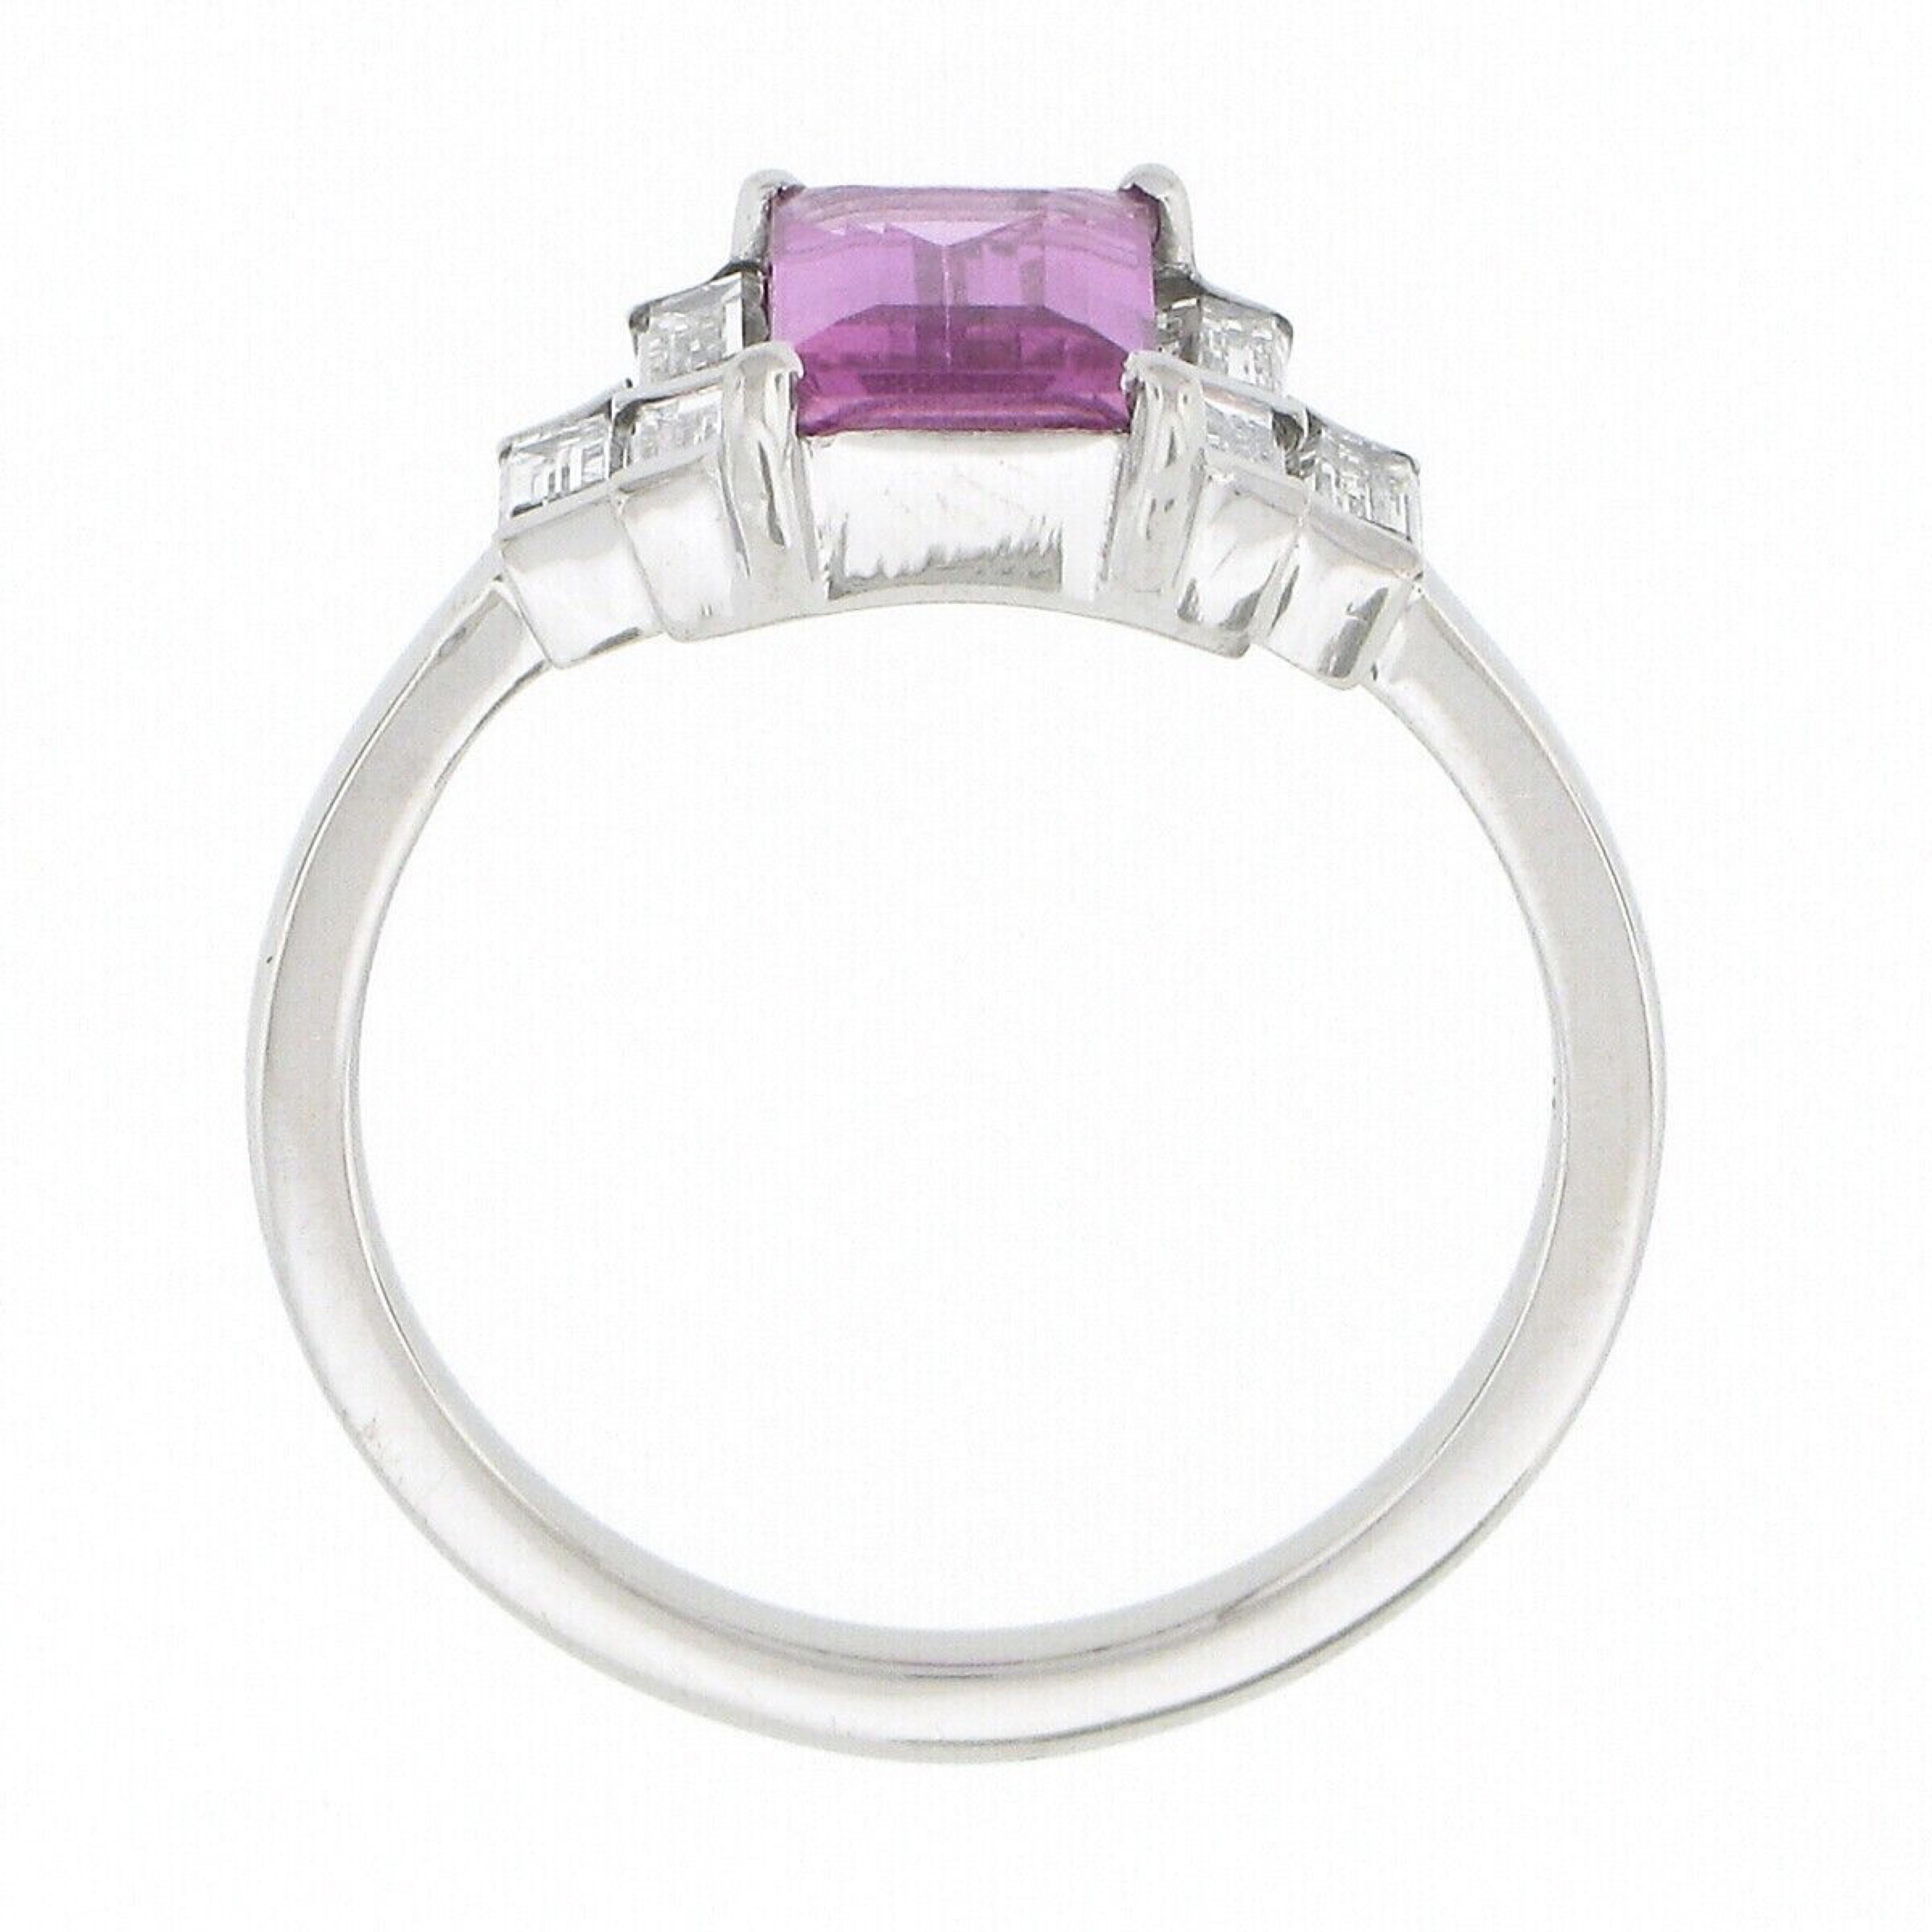 New Platinum 2.76ct GIA Emerald Step Cut Pink Sapphire & Diamond Engagement Ring For Sale 1